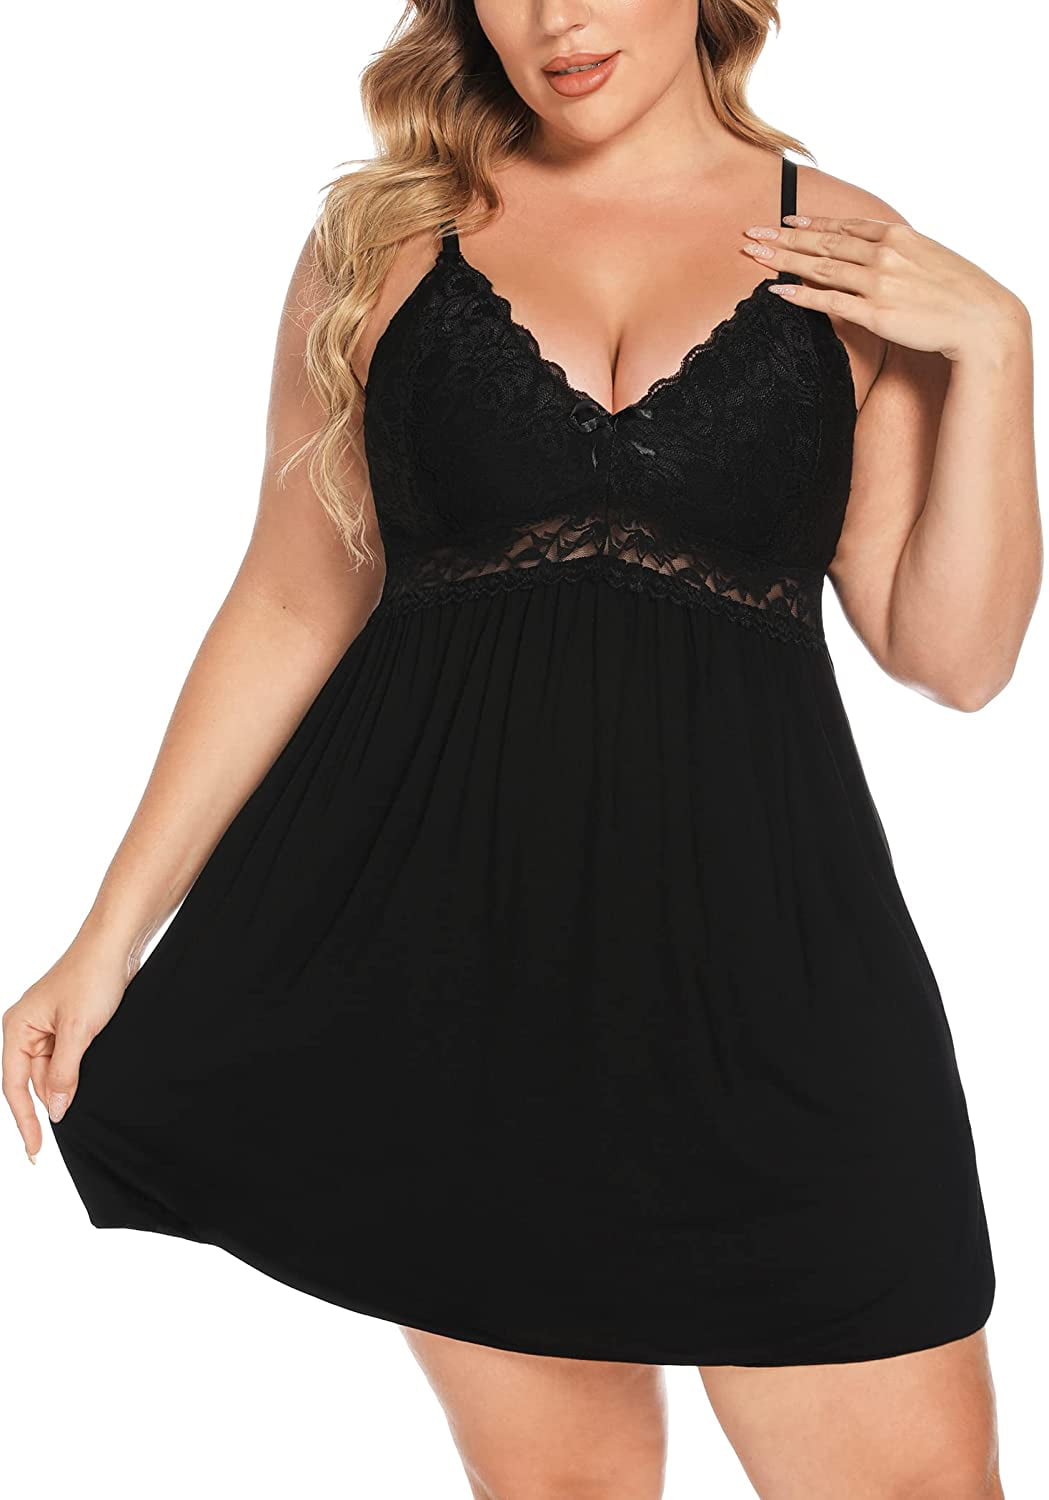 Ababoon Plus Size Lingerie for Women Lace Modal Chemises Nightgown V-Neck  Full Slip Babydoll Sleepwear Size 16-24 Plus